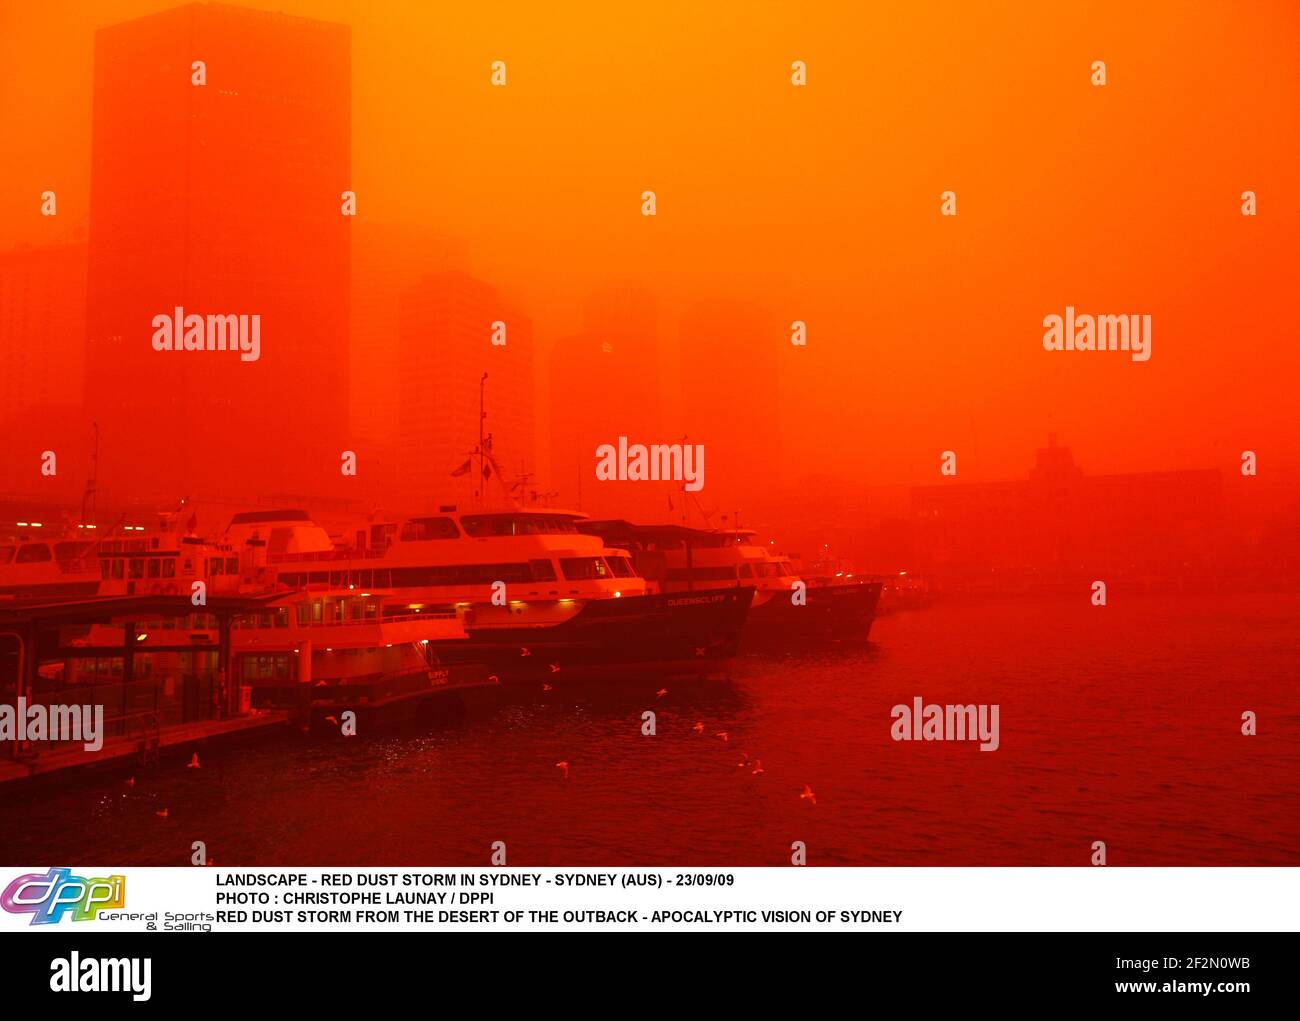 LANDSCAPE - RED DUST STORM IN SYDNEY - SYDNEY (AUS) - 23/09/09PHOTO : CHRISTOPHE LAUNAY / DPPI RED DUST STORM FROM THE DESERT OF THE OUTBACK - APOCALYPTIC VISION OF SYDNEY Stock Photo